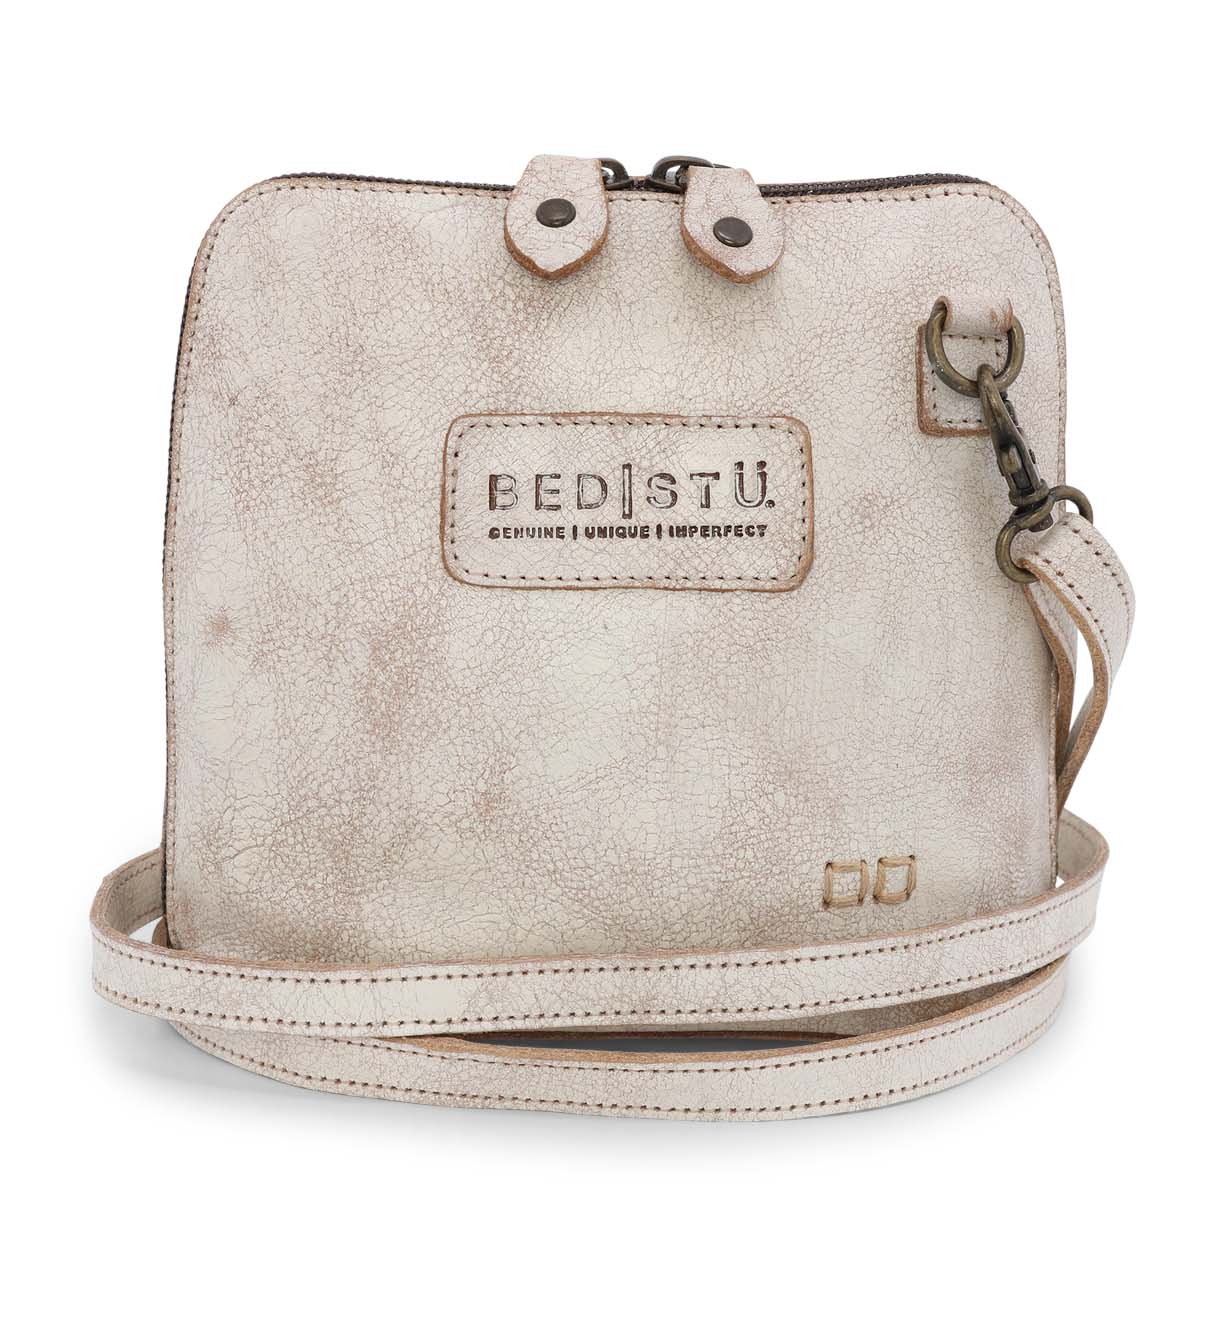 A white Ventura cross body bag with a strap, made by Bed Stu.